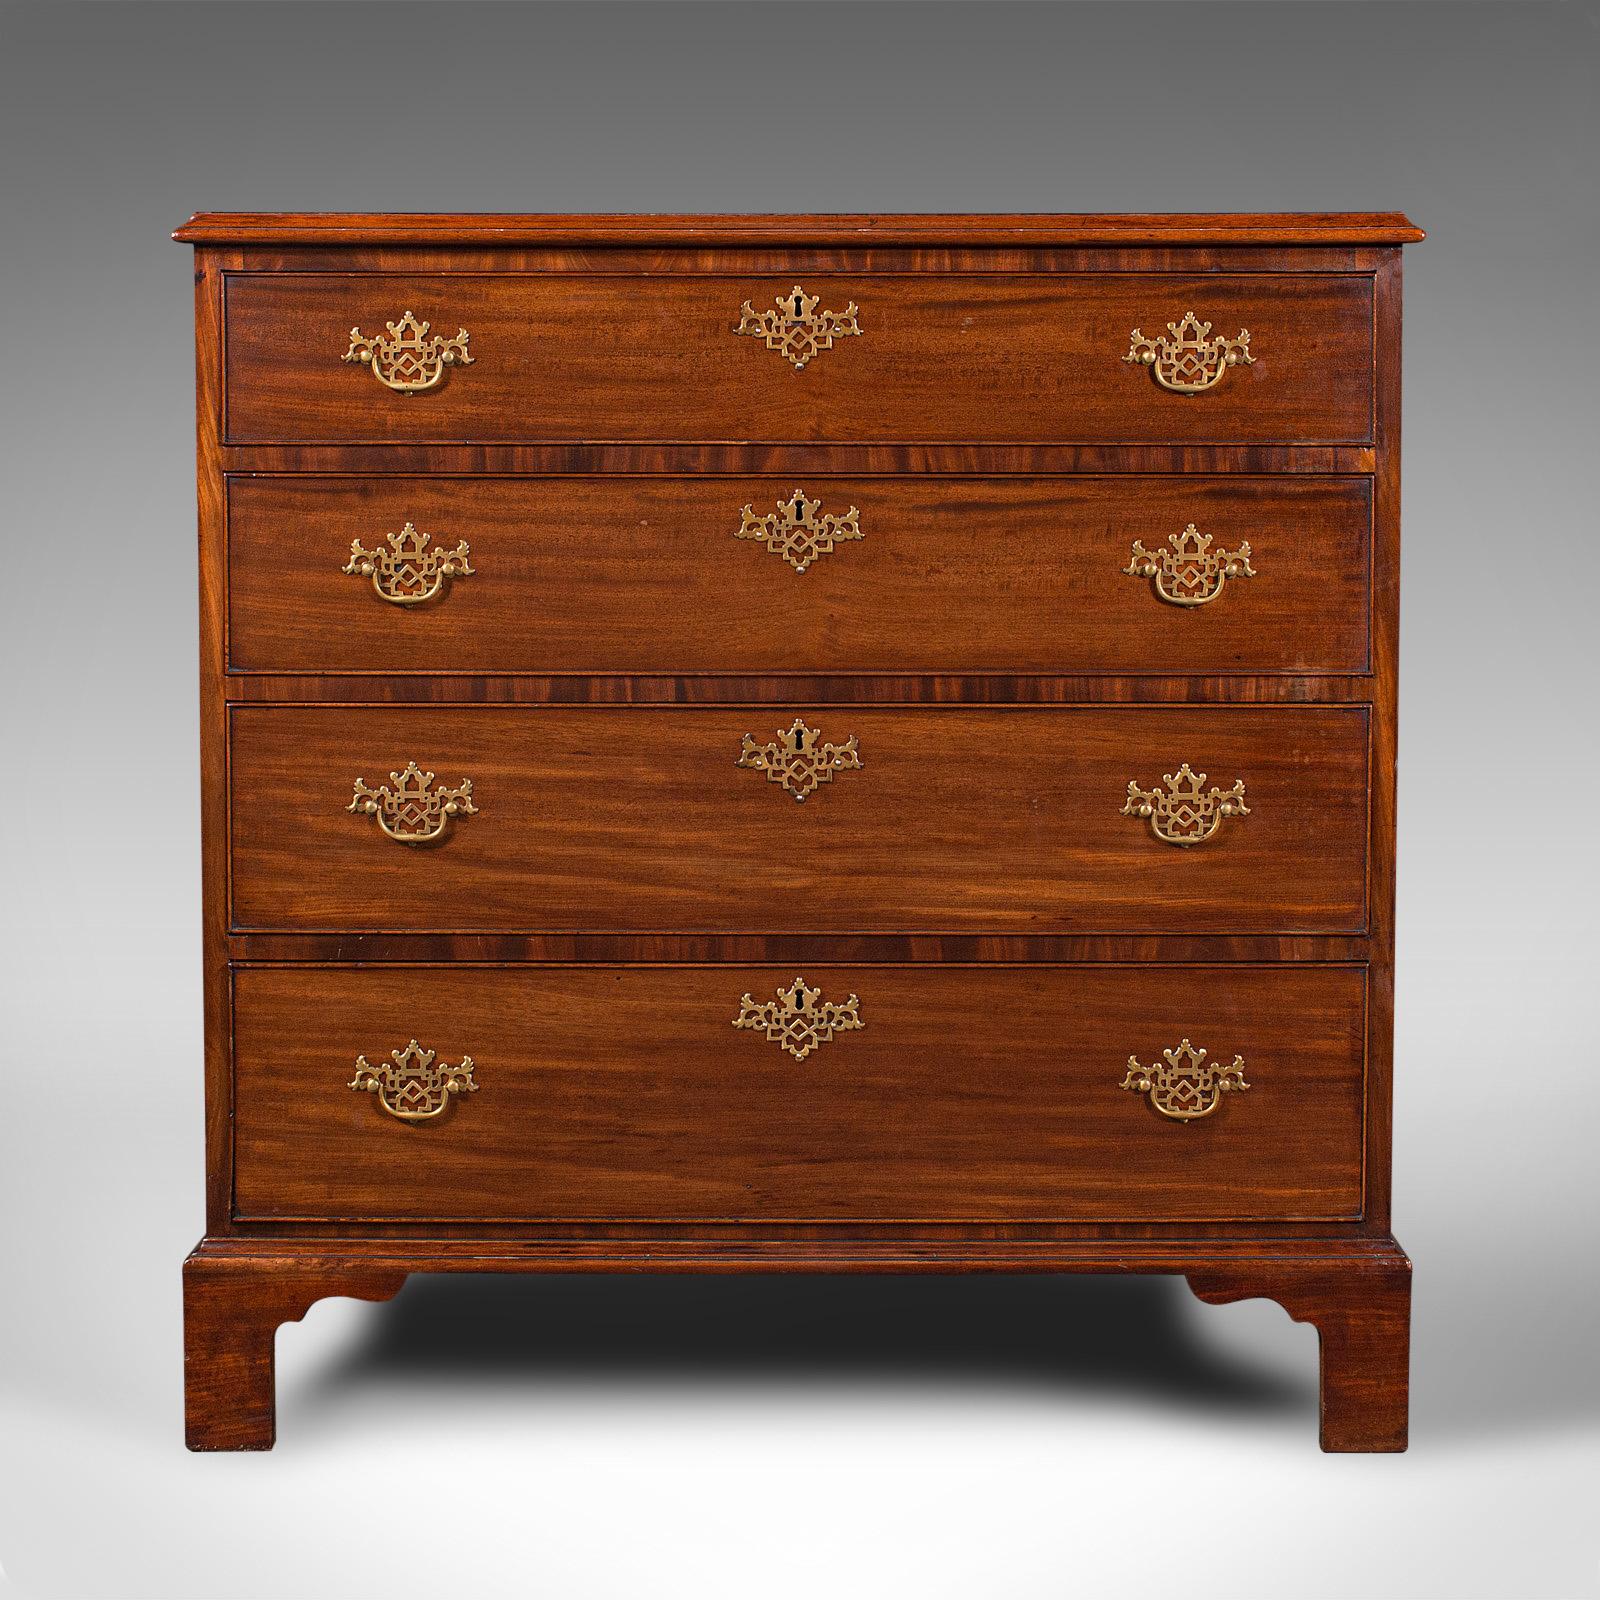 This is an antique gentleman's chest of drawers. An English, mahogany bedroom cabinet, dating to the Georgian period, circa 1800.

Delightfully appointed example of Georgian craftsmanship
Displaying a desirable aged patina throughout
Select